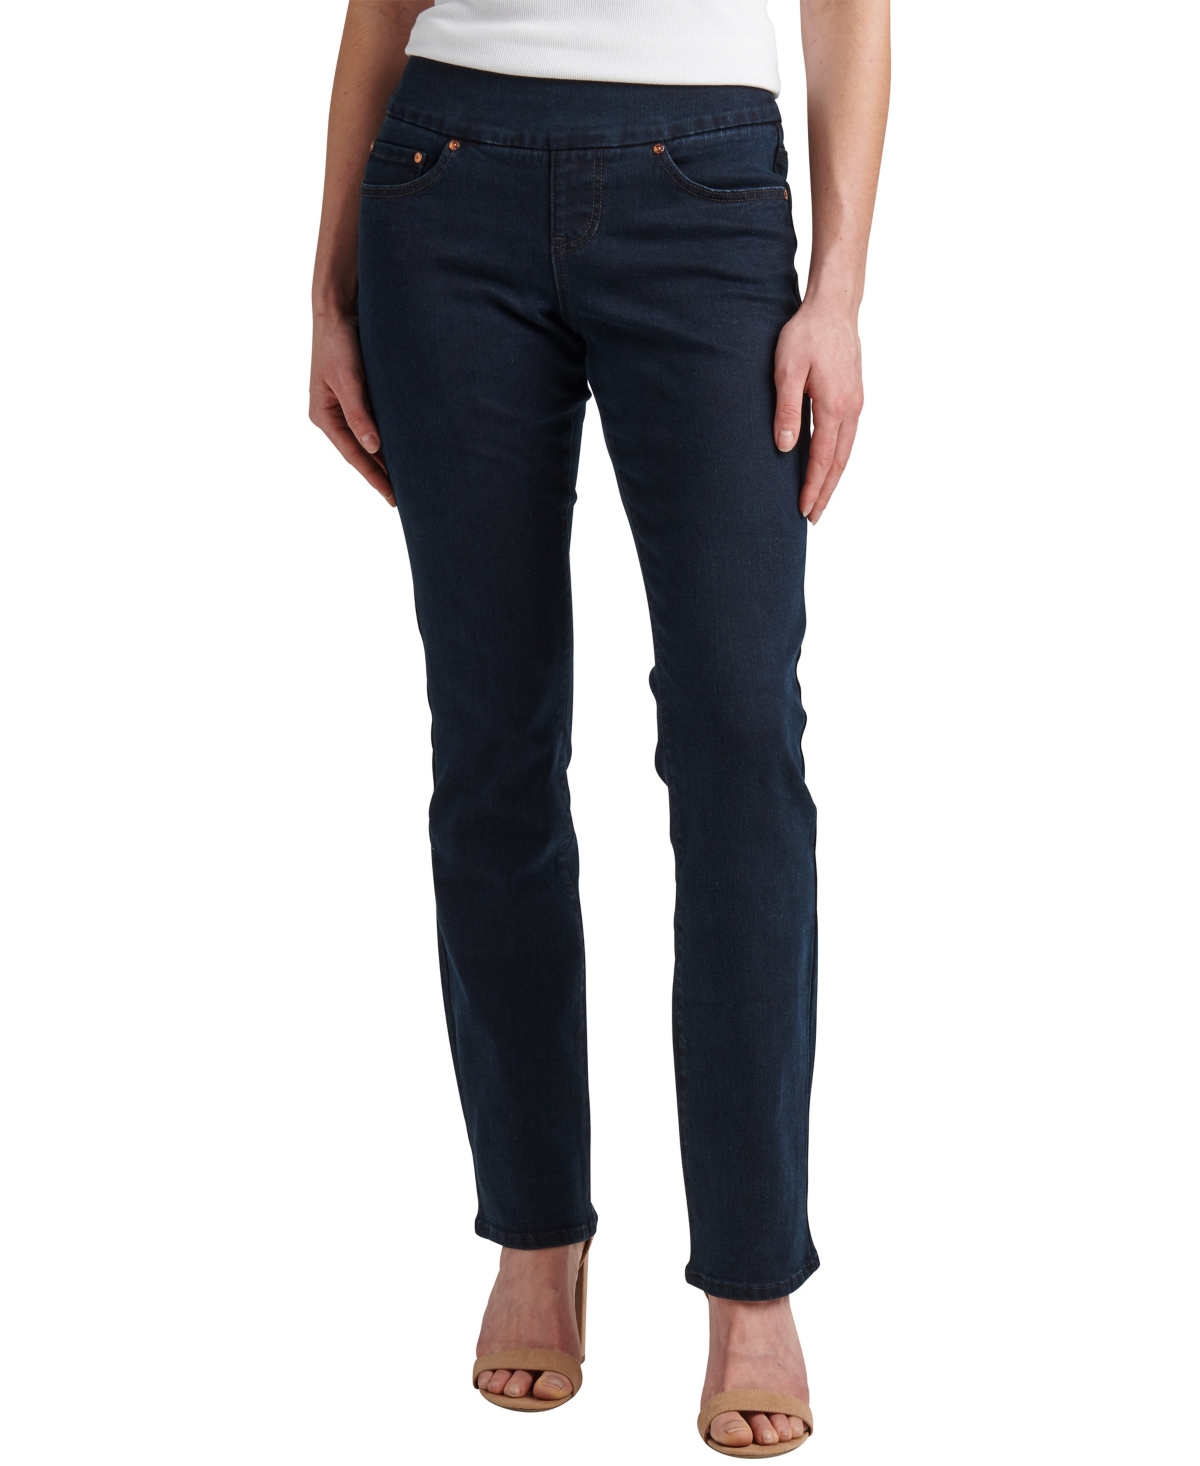 Women's Peri Mid Rise Straight Leg Pull-On Jeans - After Midnight